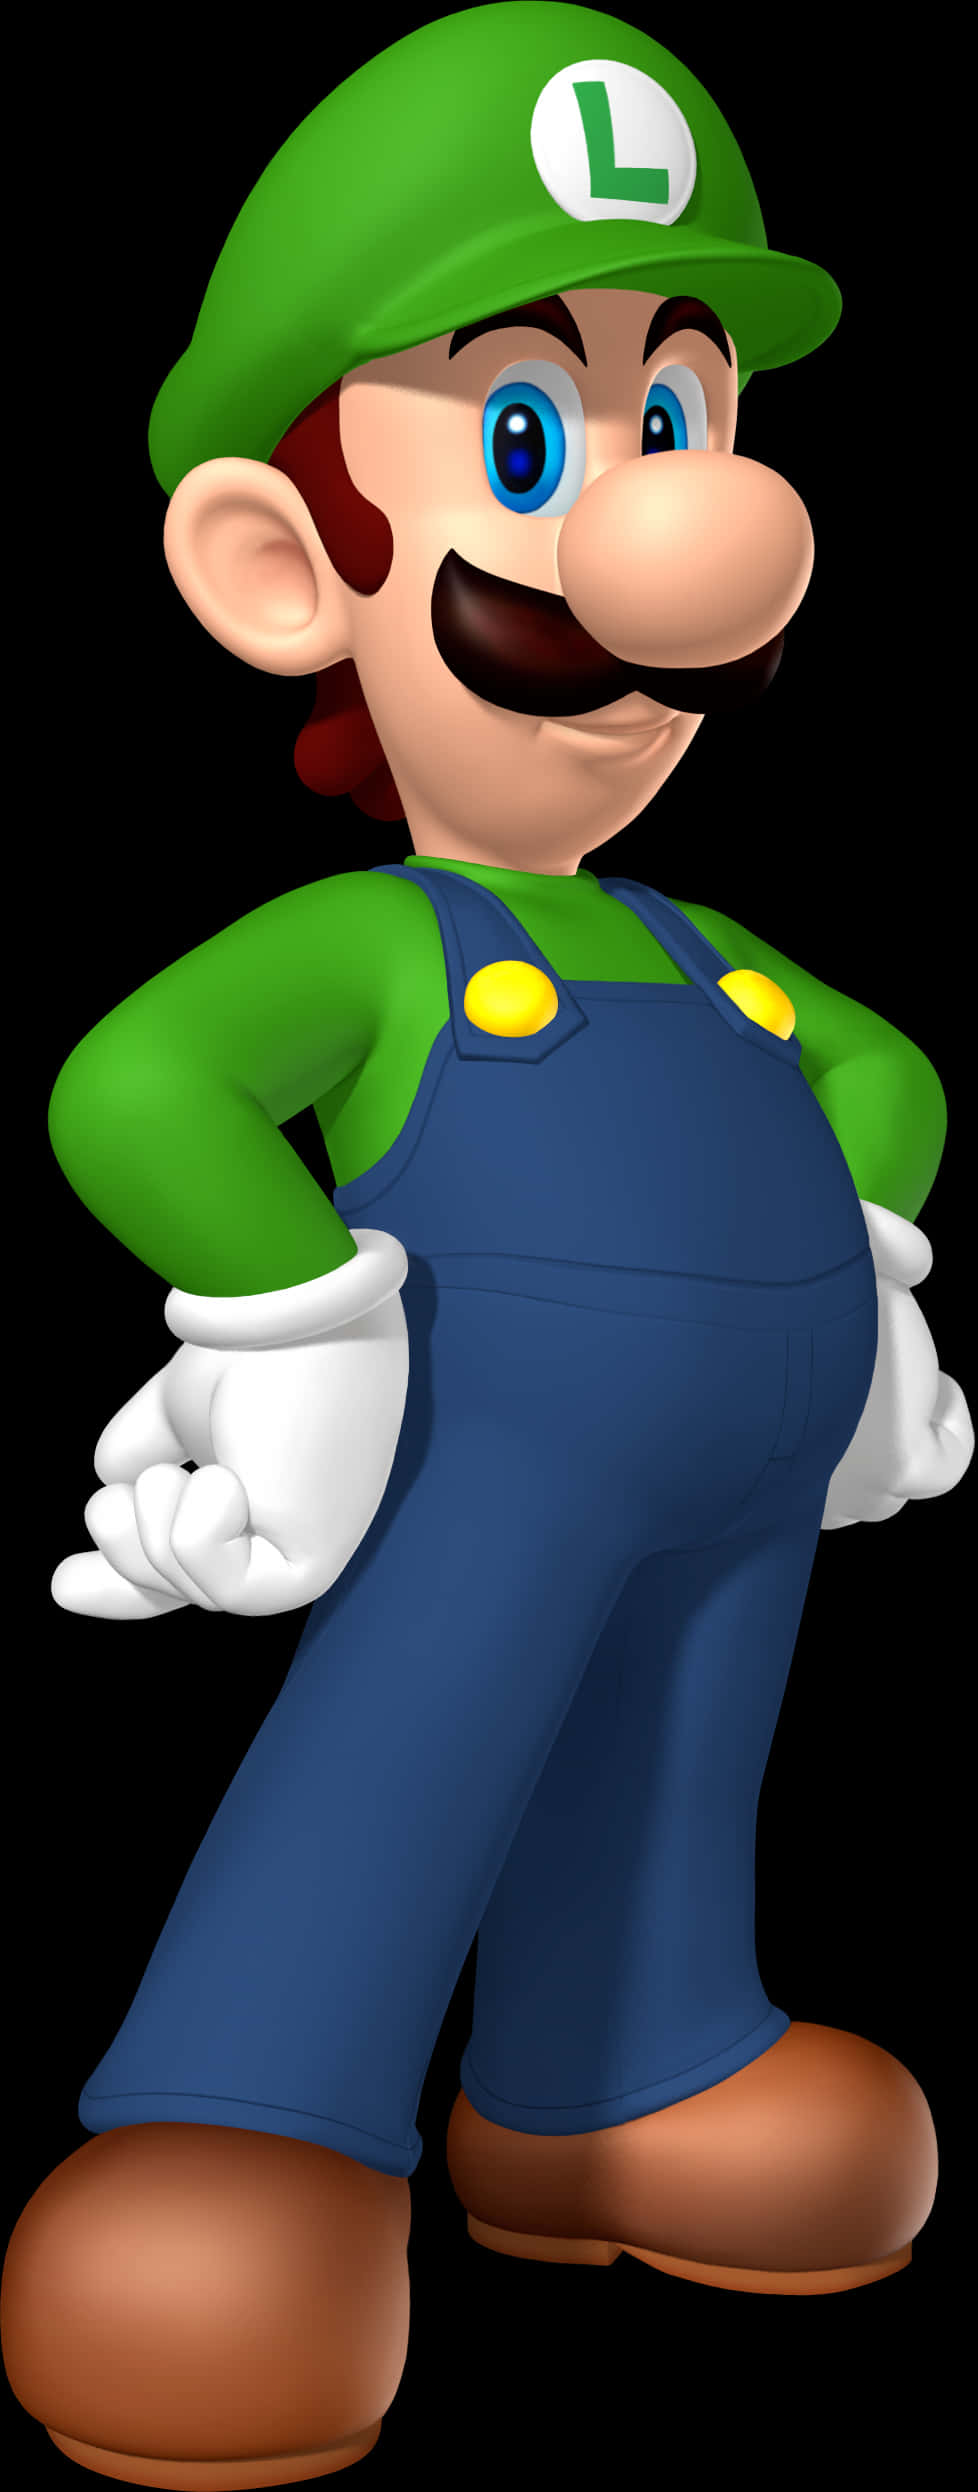 Luigi Classic Video Game Character PNG